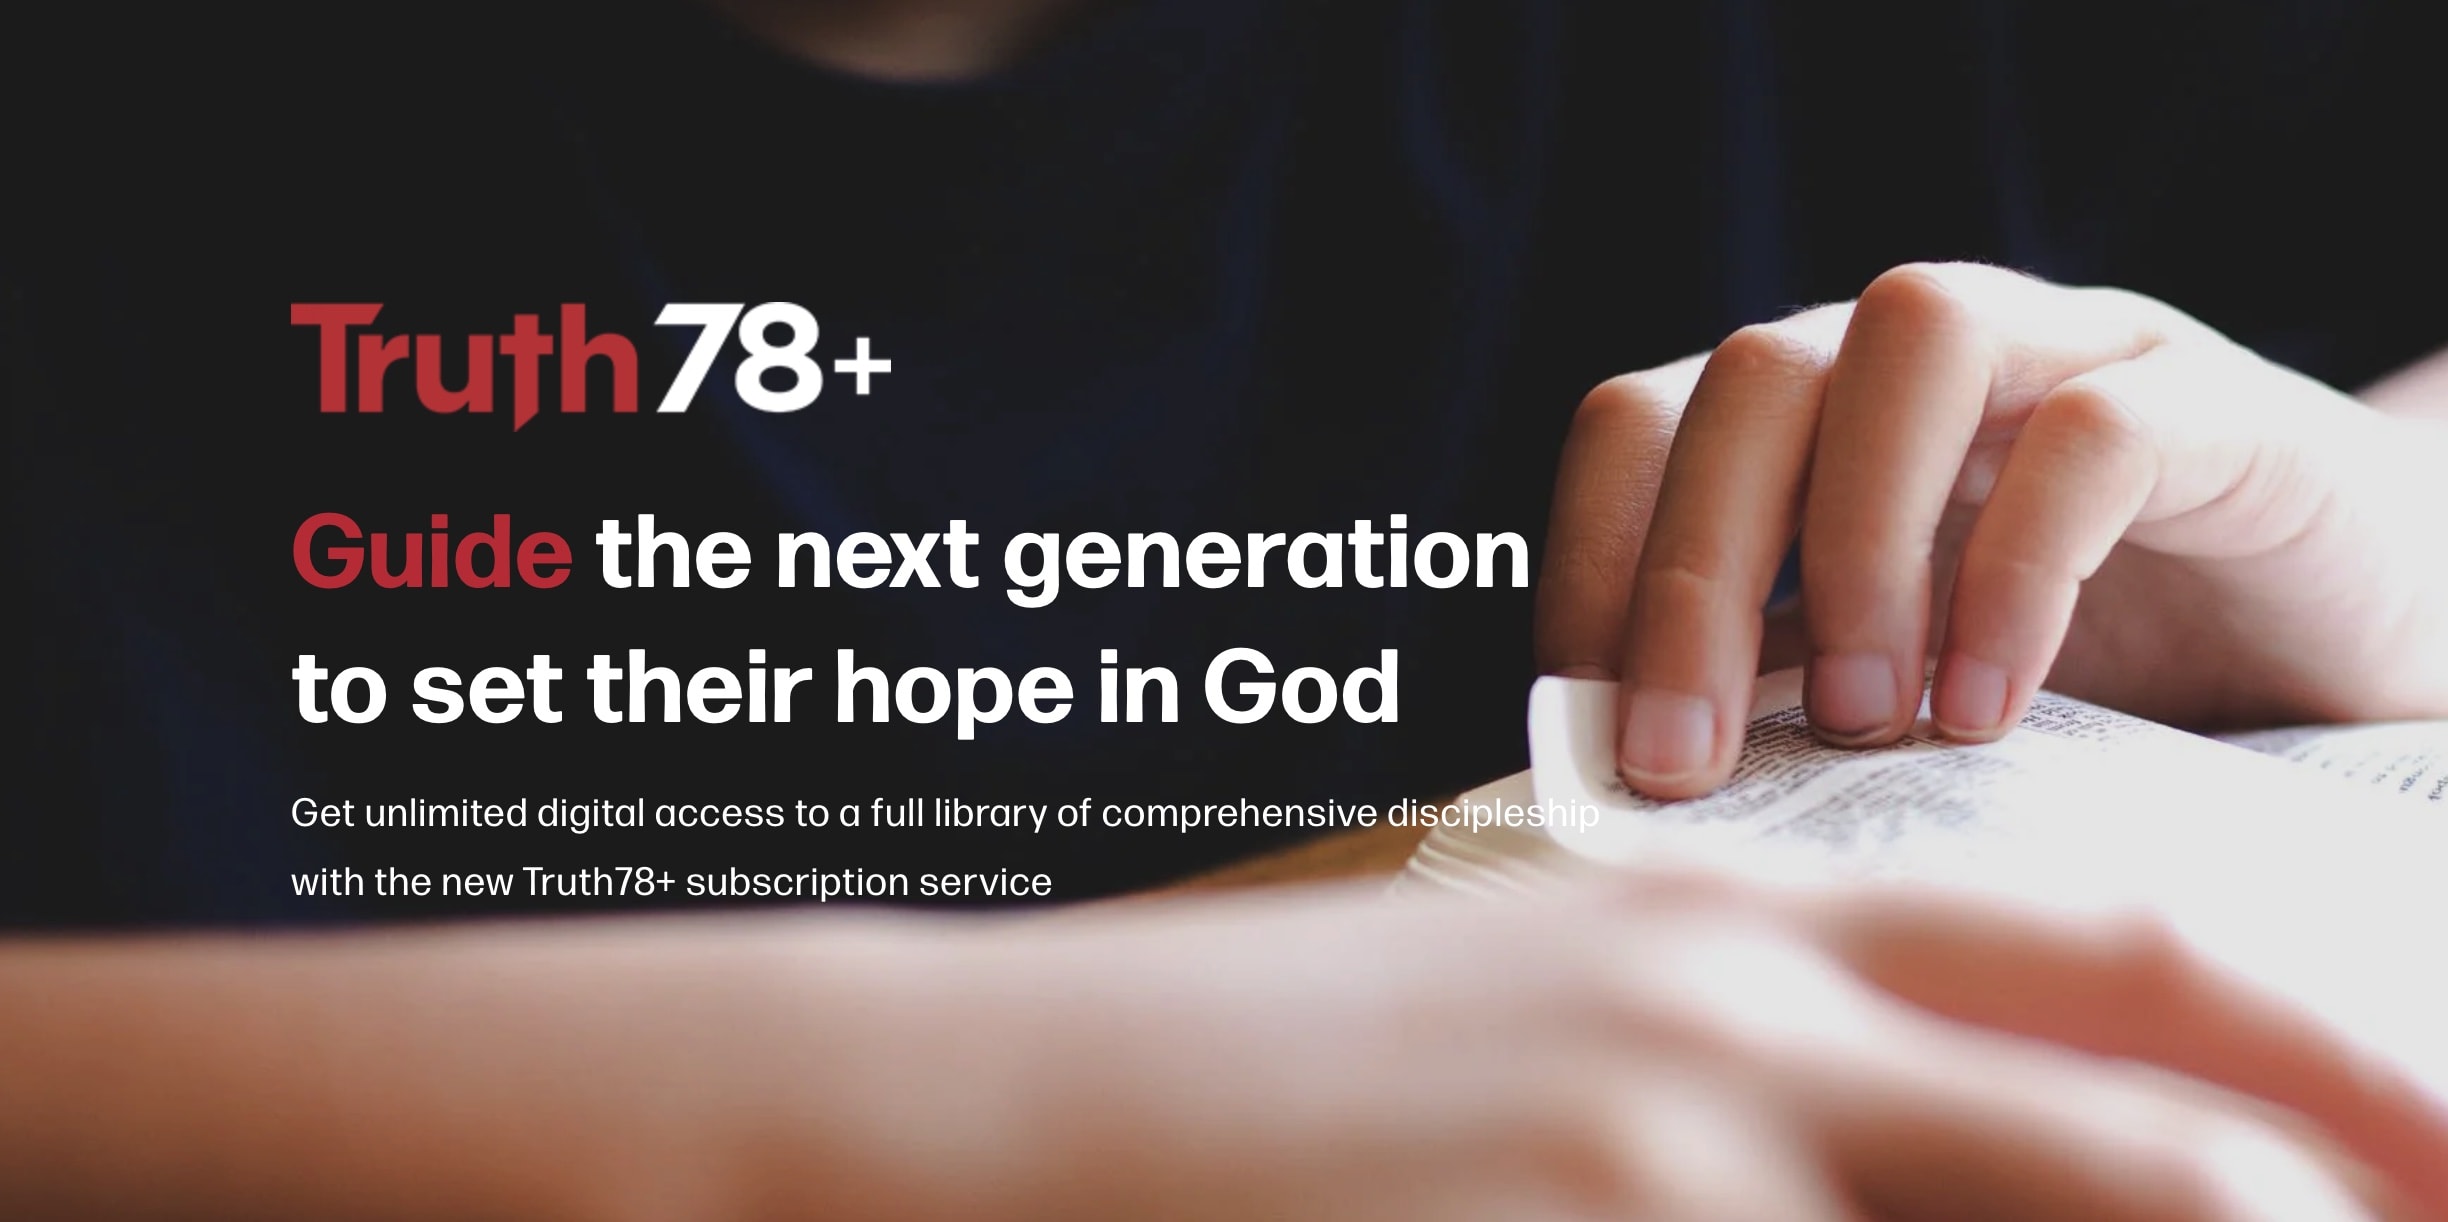 Truth78 is launching Truth78+, a new subscription service offering churches digital access to a full library of discipleship resources.